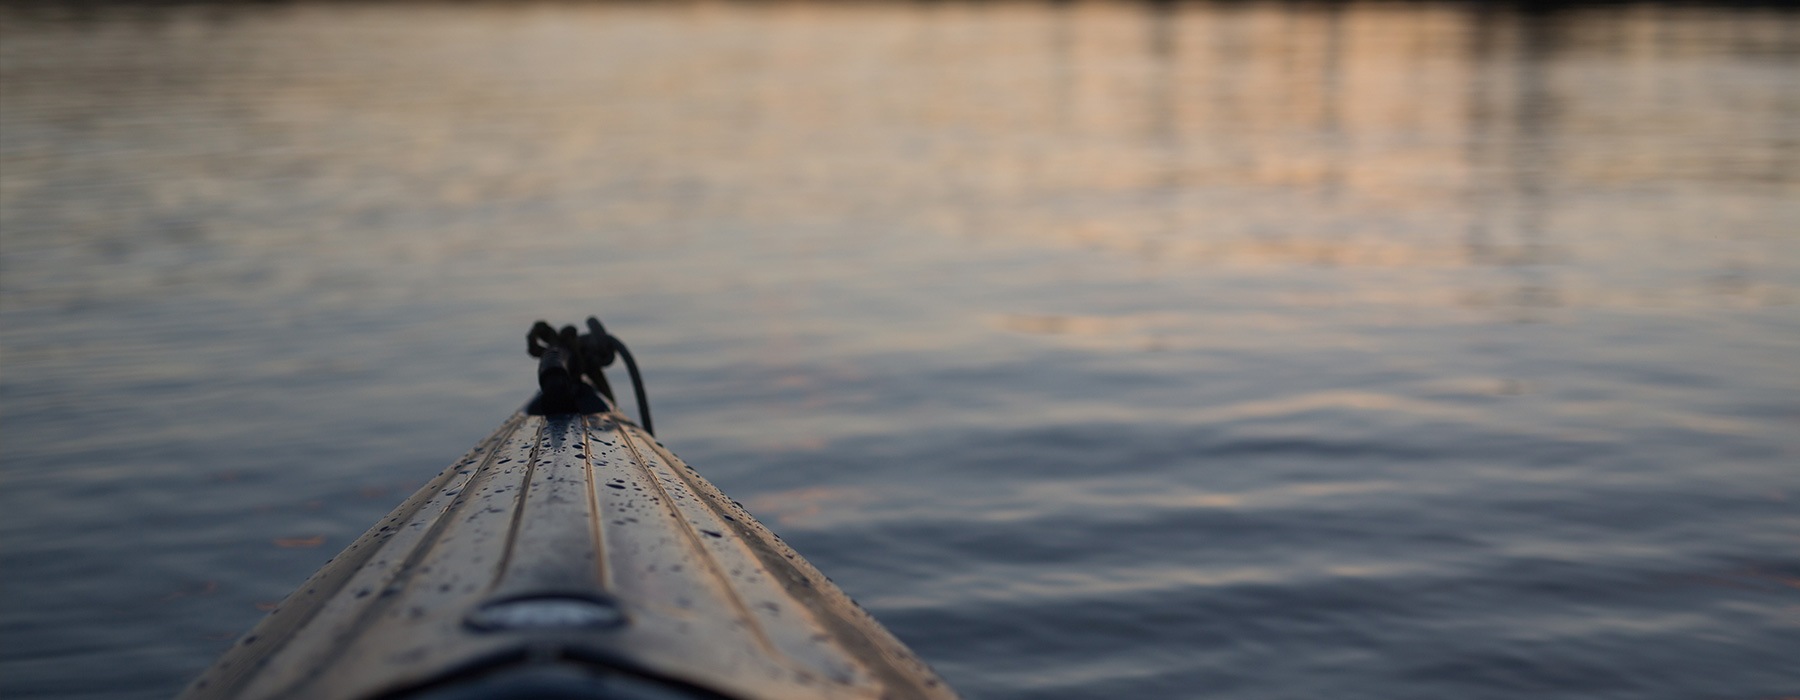 lifestyle image of the end of a rowboat on reflective water